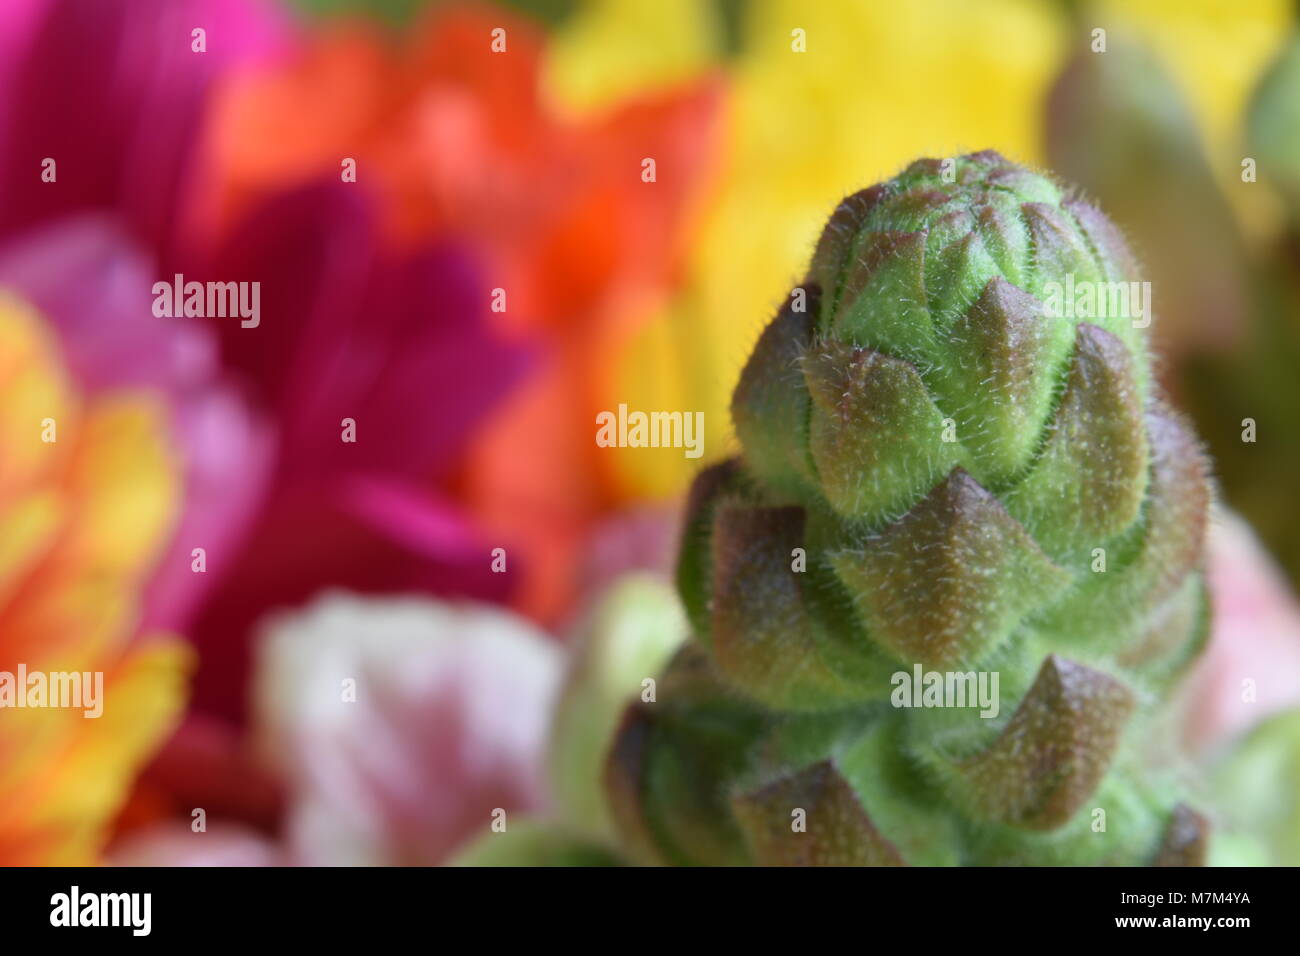 Closeup detail of buds within a bouquet of flowers taken at a shallow depth of field. Stock Photo